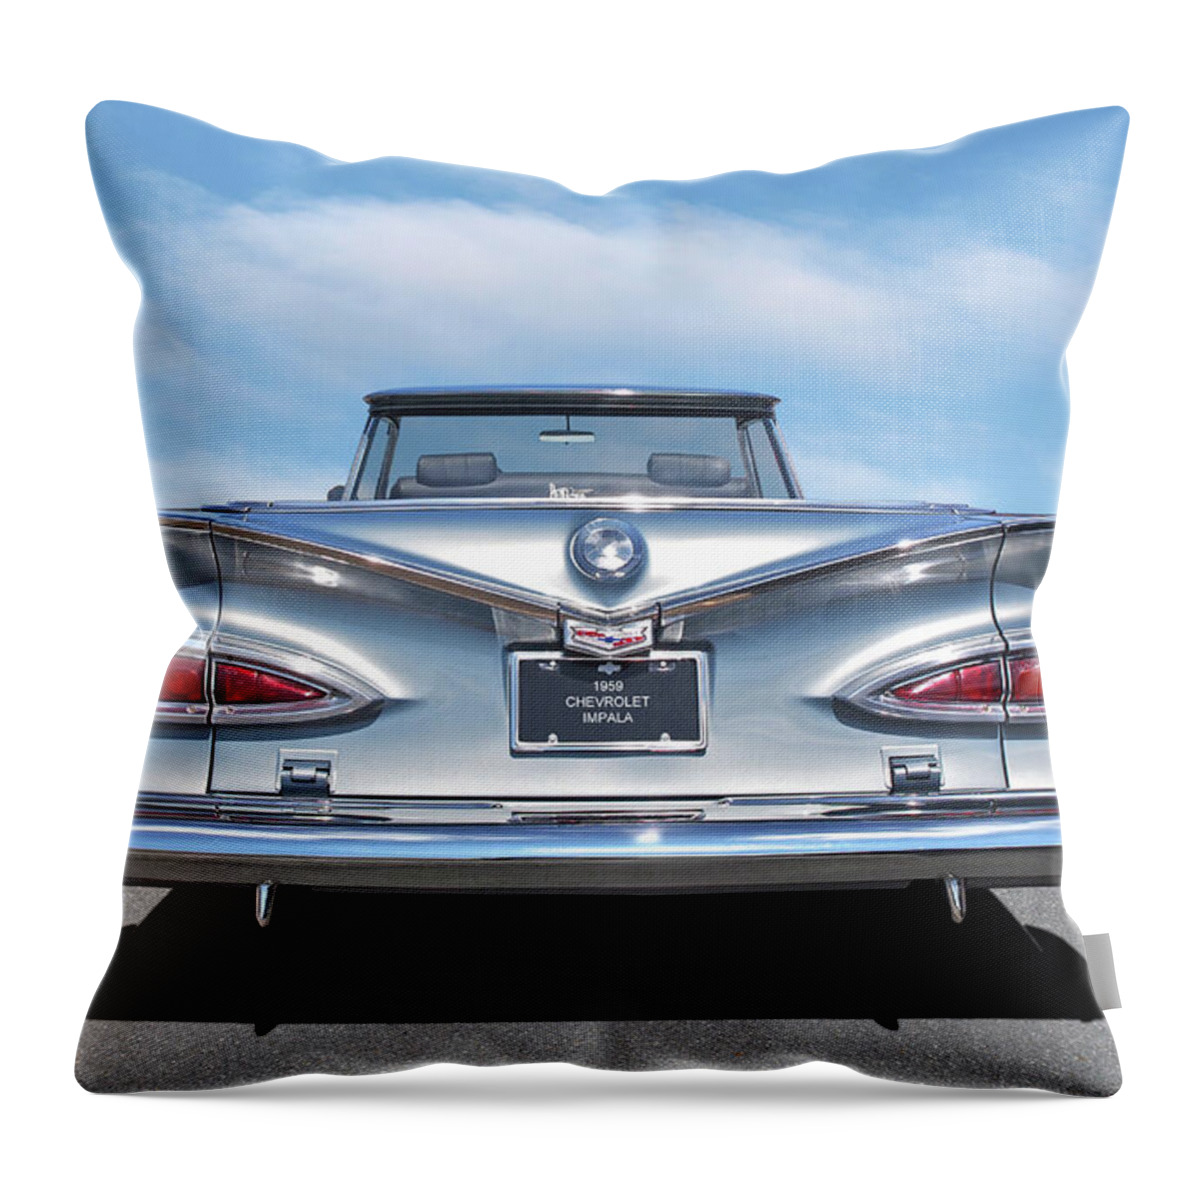 Chevrolet Impala Throw Pillow featuring the photograph Chevrolet Impala 1959 Shining in the Light by Gill Billington